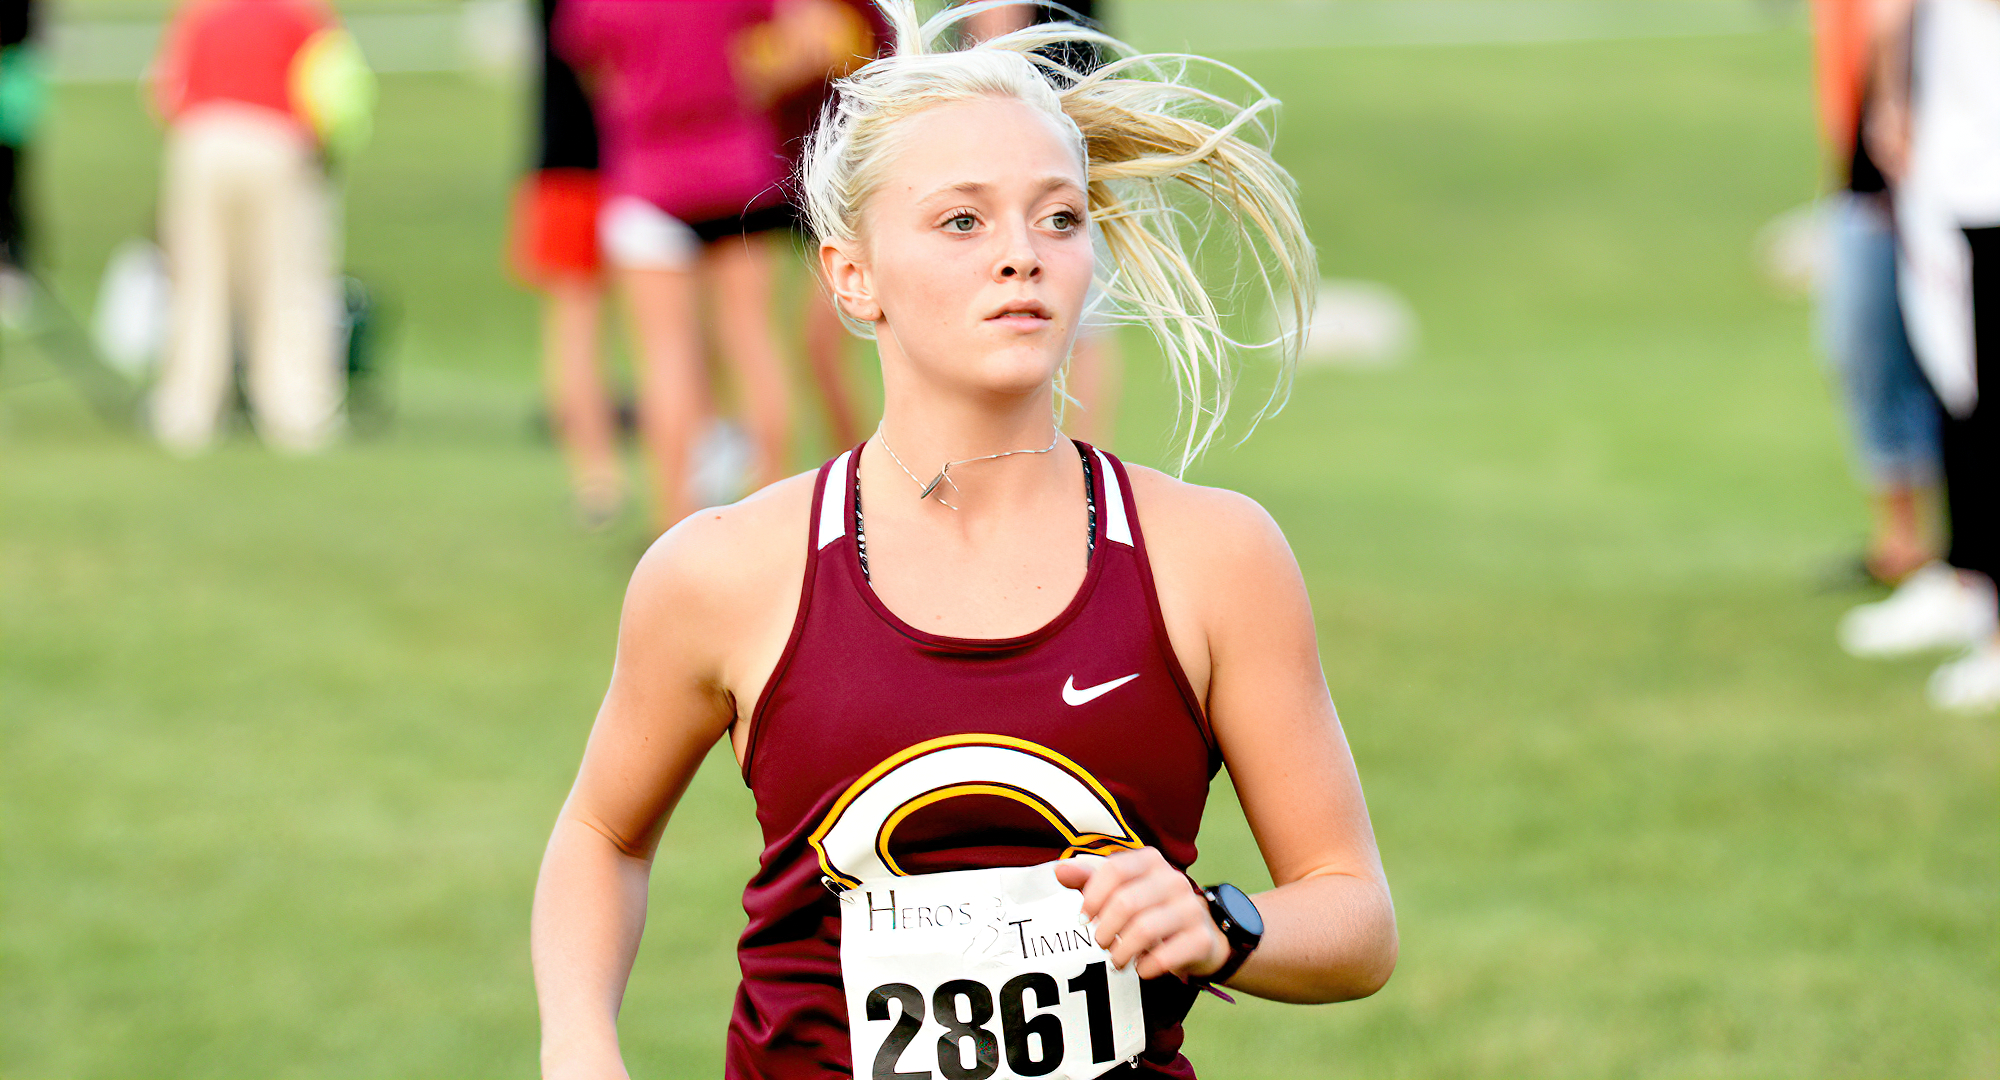 First-year runner Drew Frolek led Concordia at the MSUM Twilight Meet. She ran a 15:39.5 and was one of two CC athletes to finish in the Top 25.